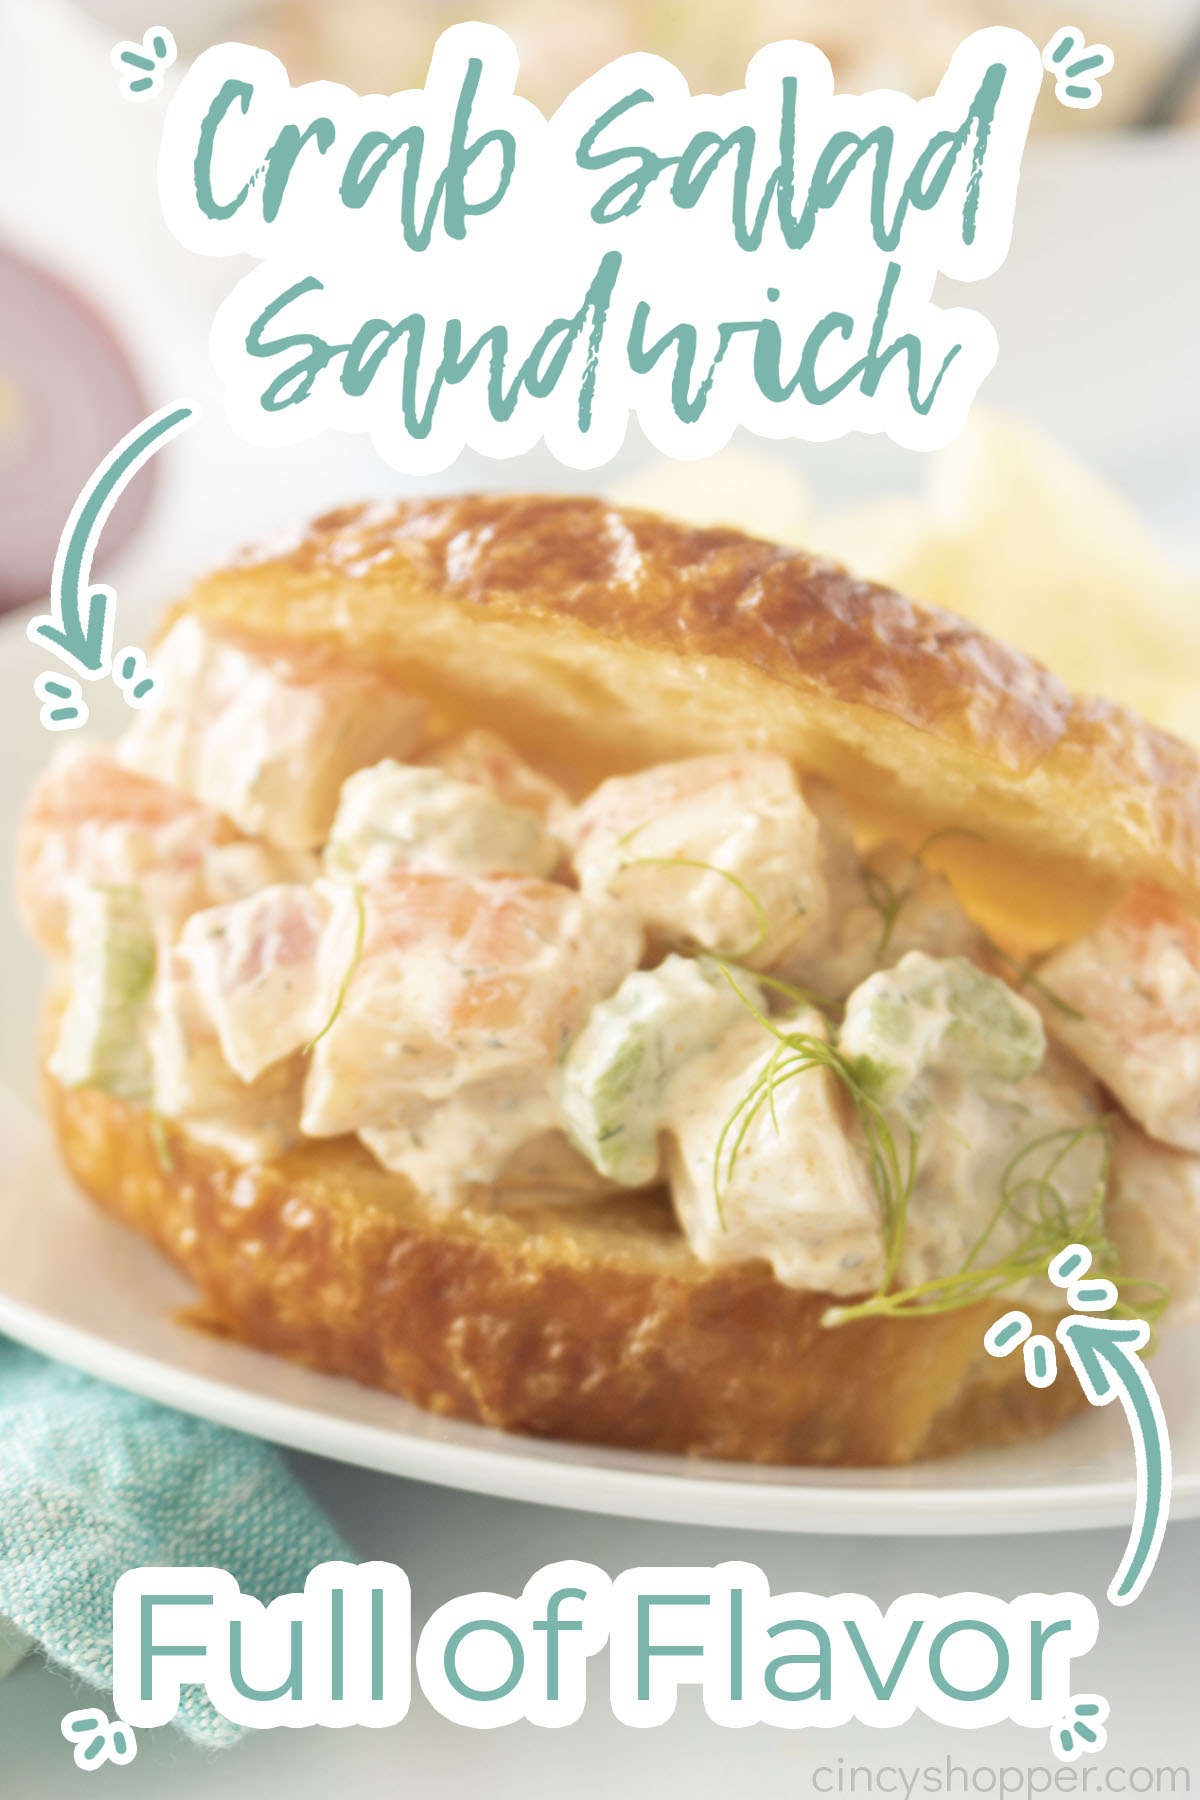 Text on image Crab Salad Sandwich Full of Flavor.